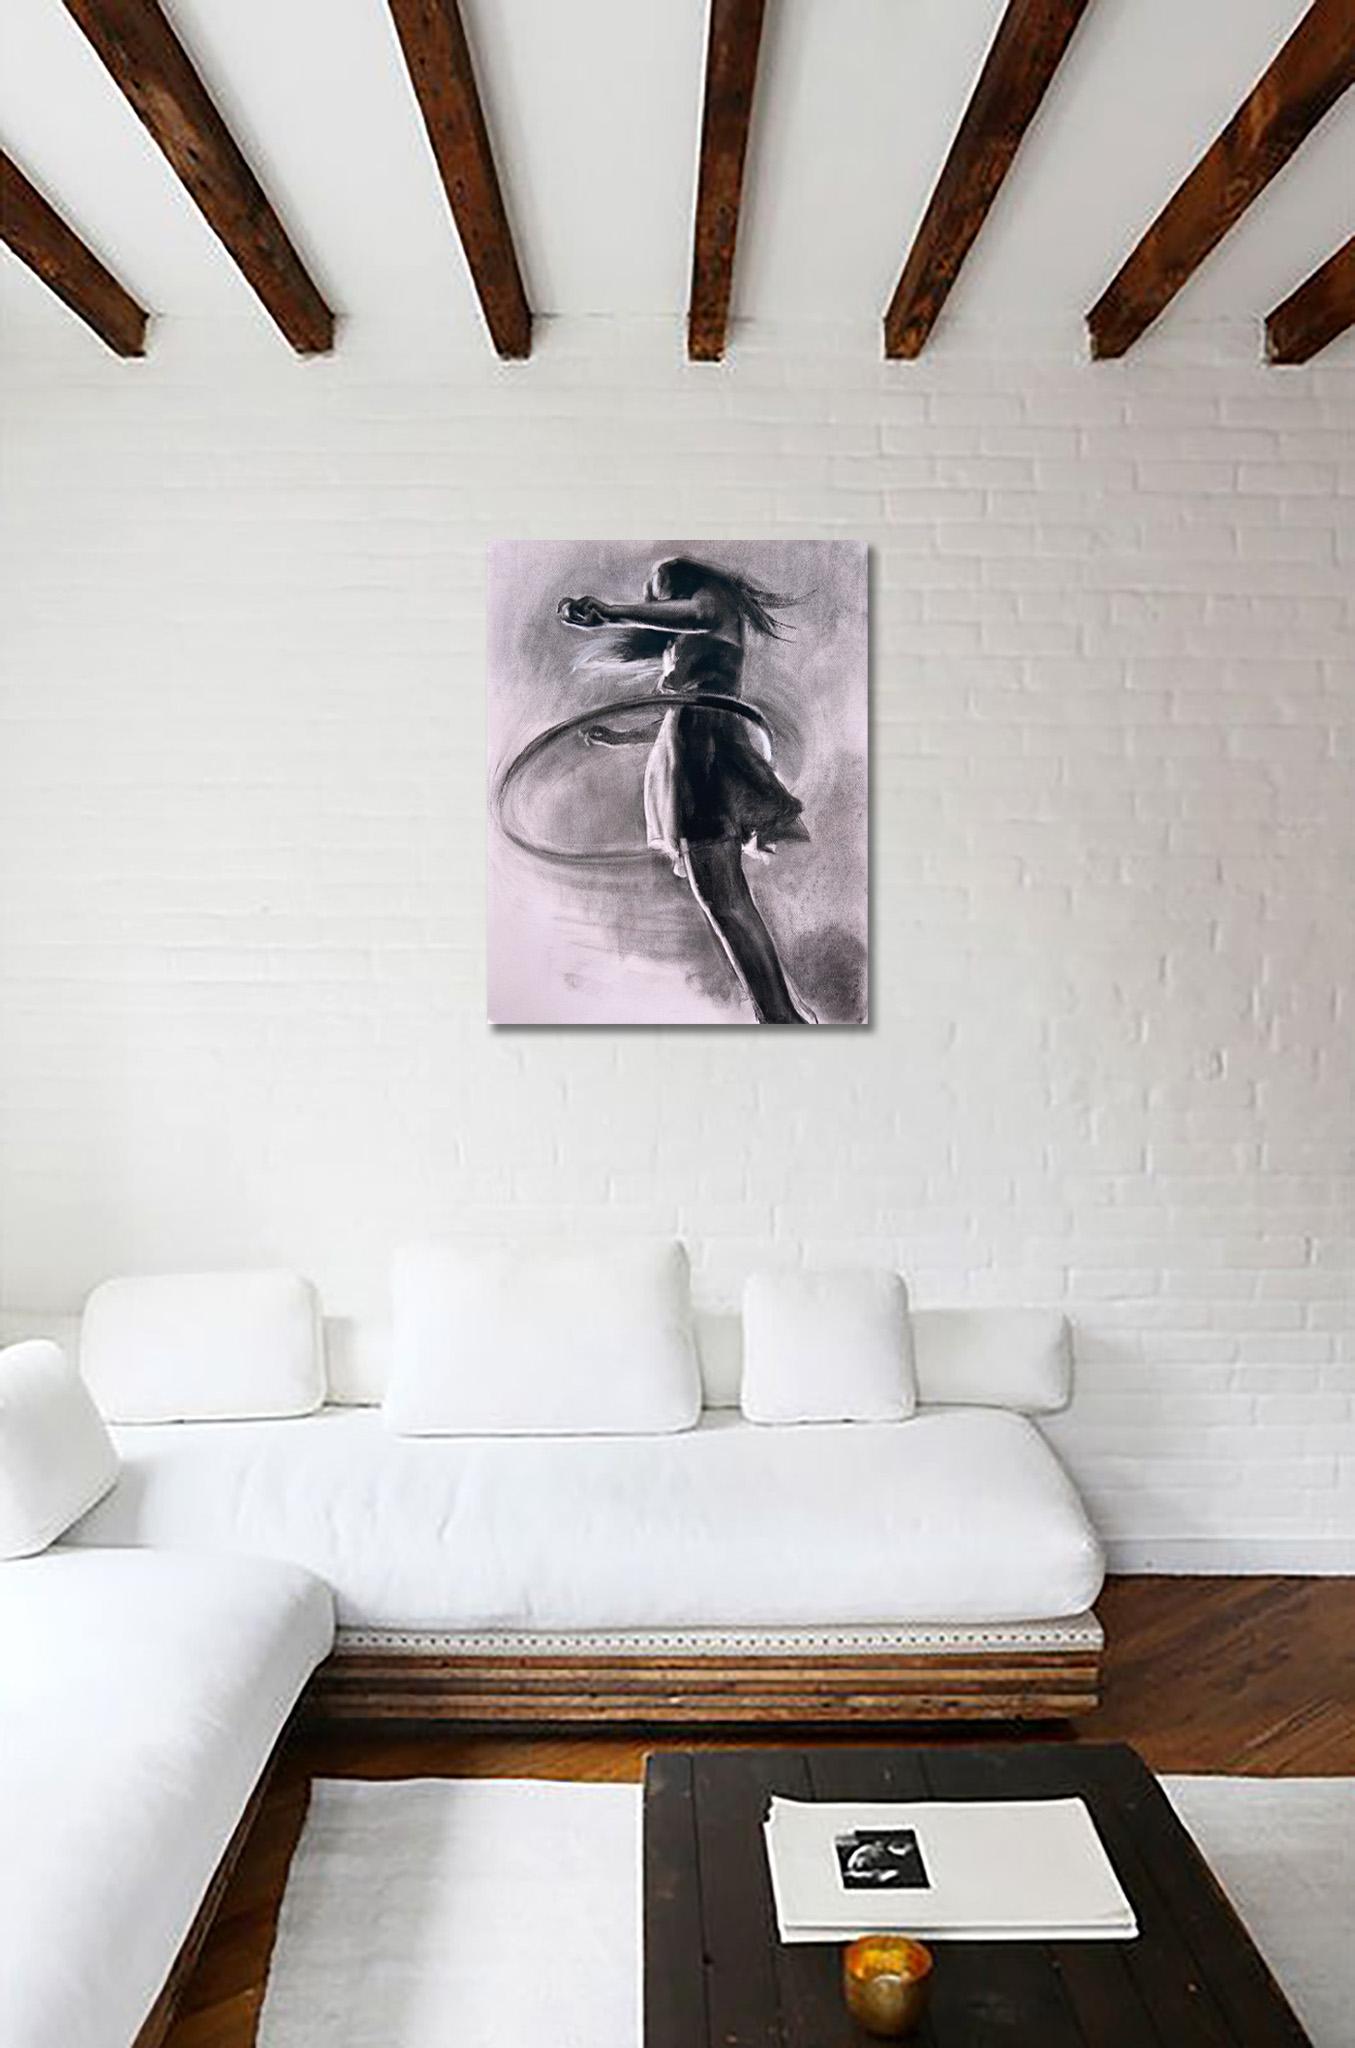 Hula Study, energetic realistic charcoal drawing on paper, girl and hula hoop - Art by Patsy McArthur